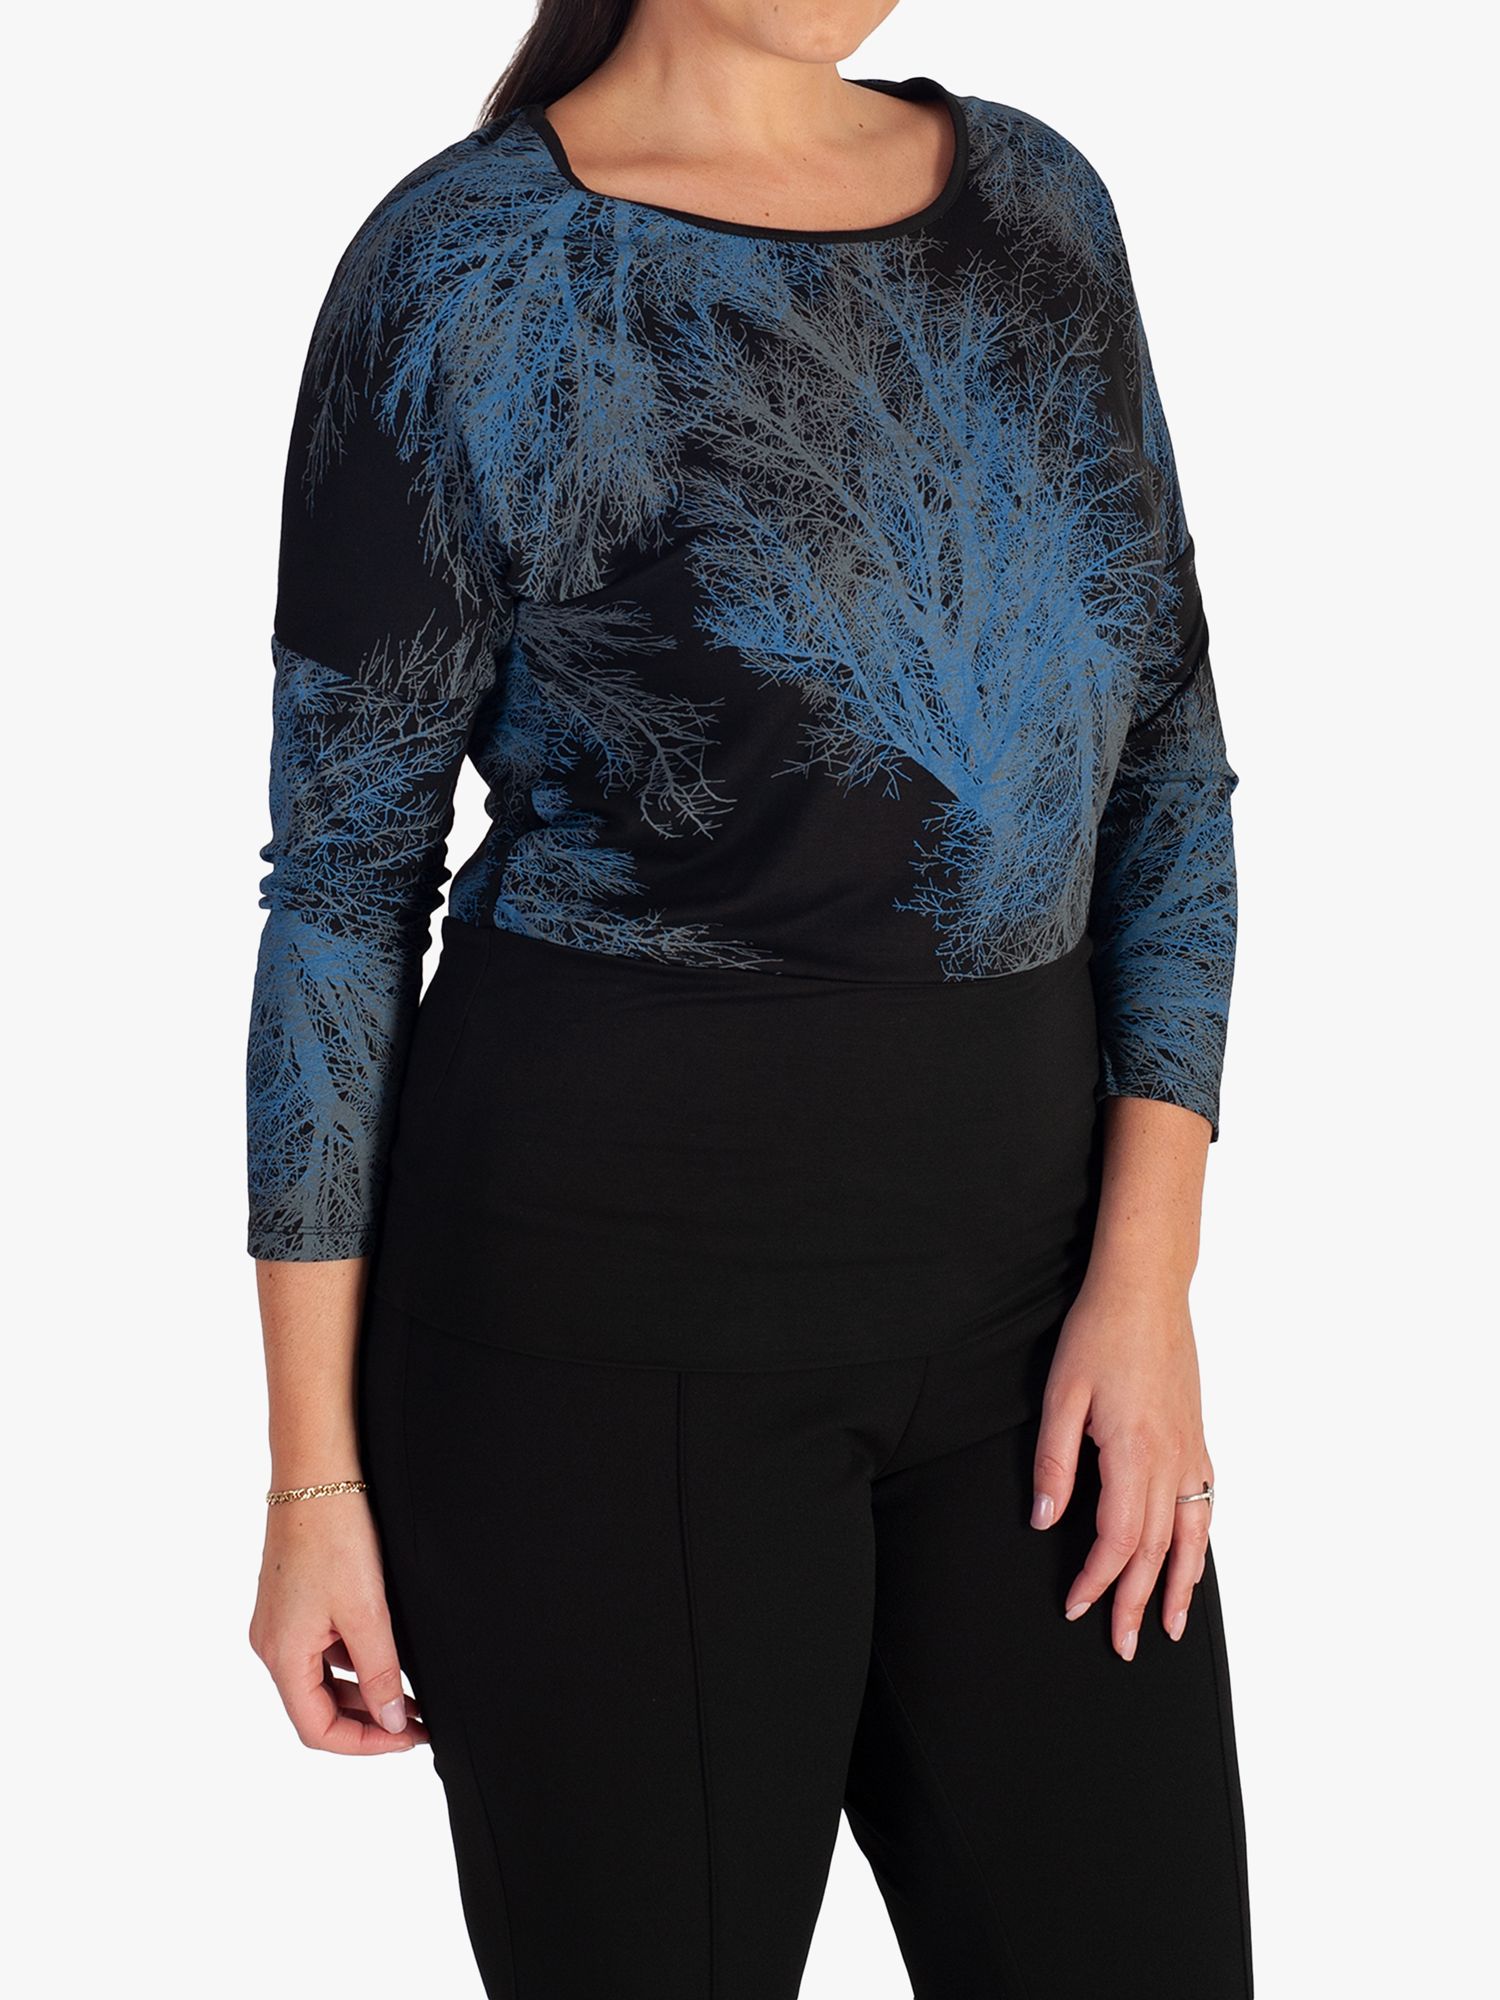 chesca Tree Print Long Sleeved Top, Black/Blue, 14-16